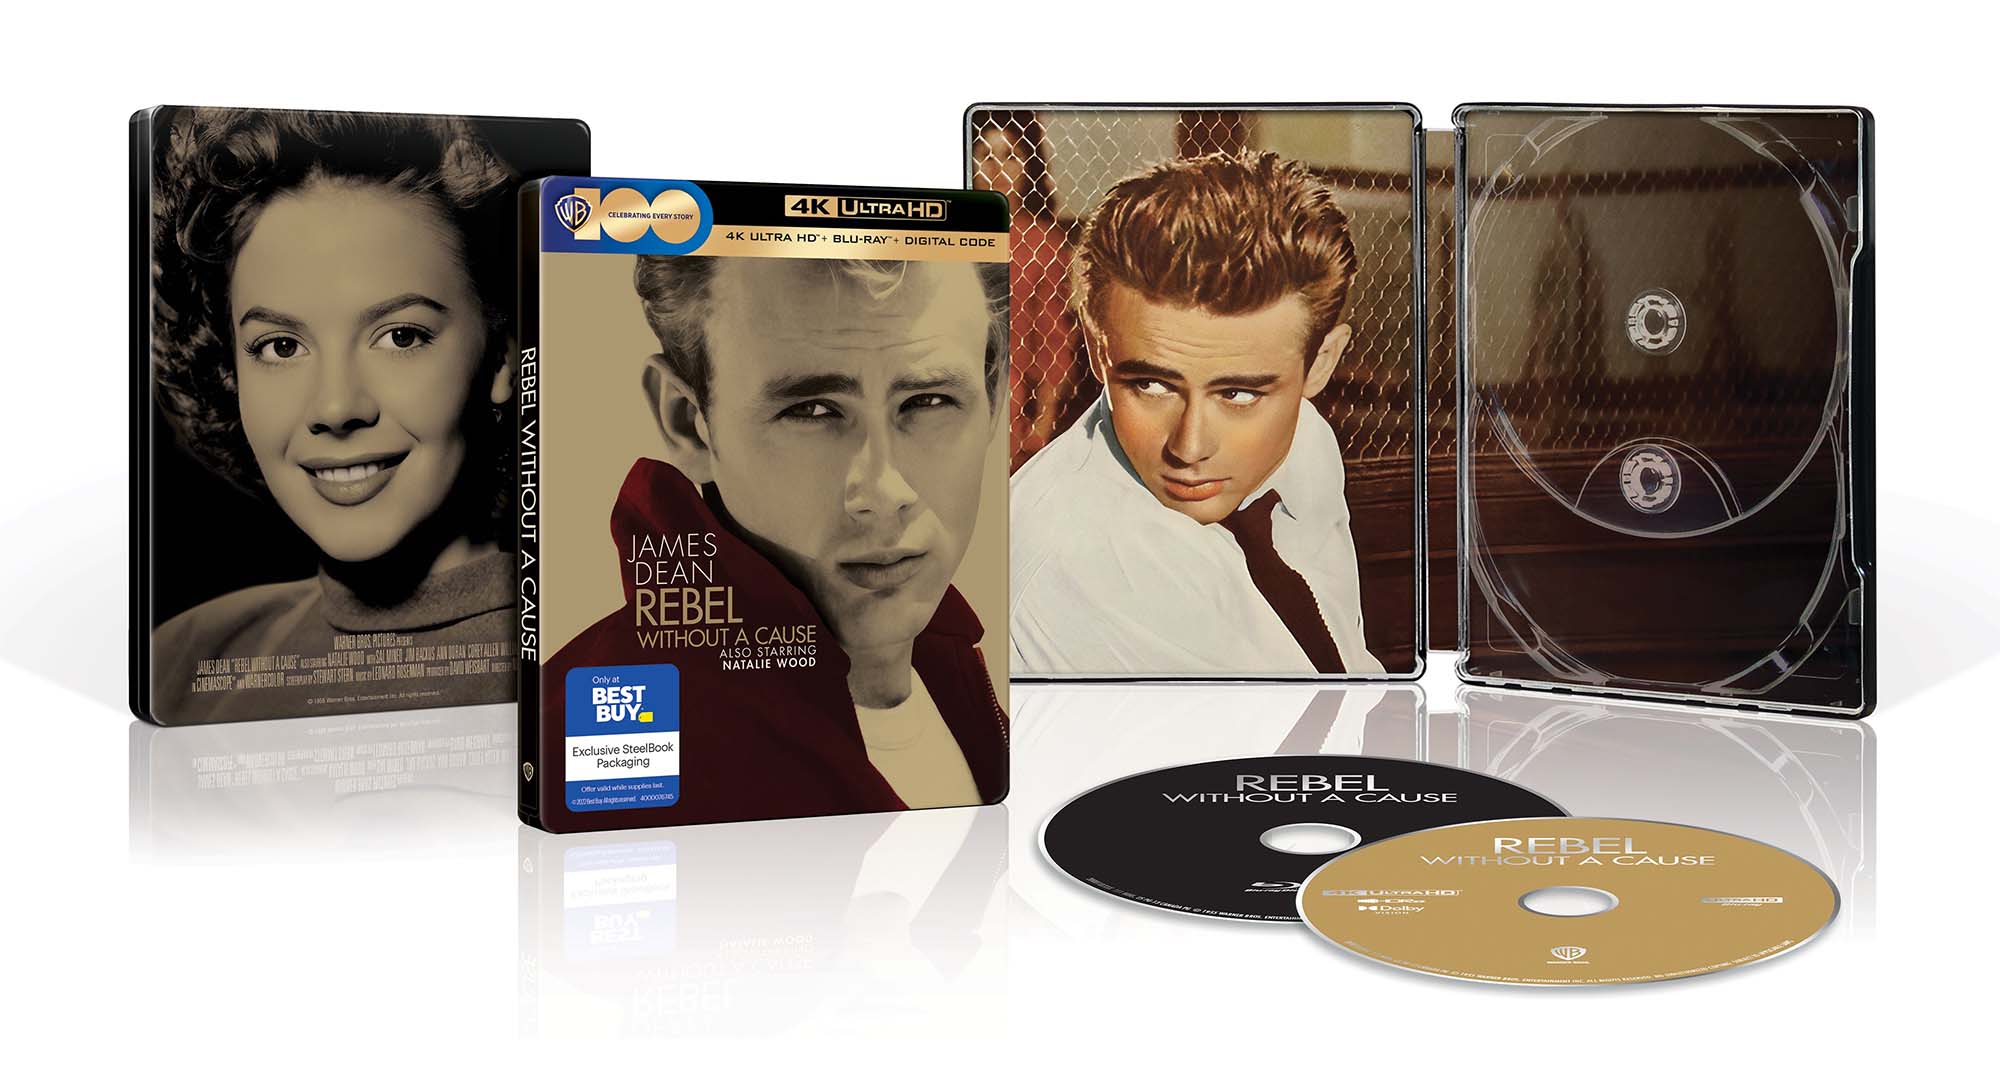 Rebel Without a Cause (1955) 4k Blu-ray Limited Edition SteelBook